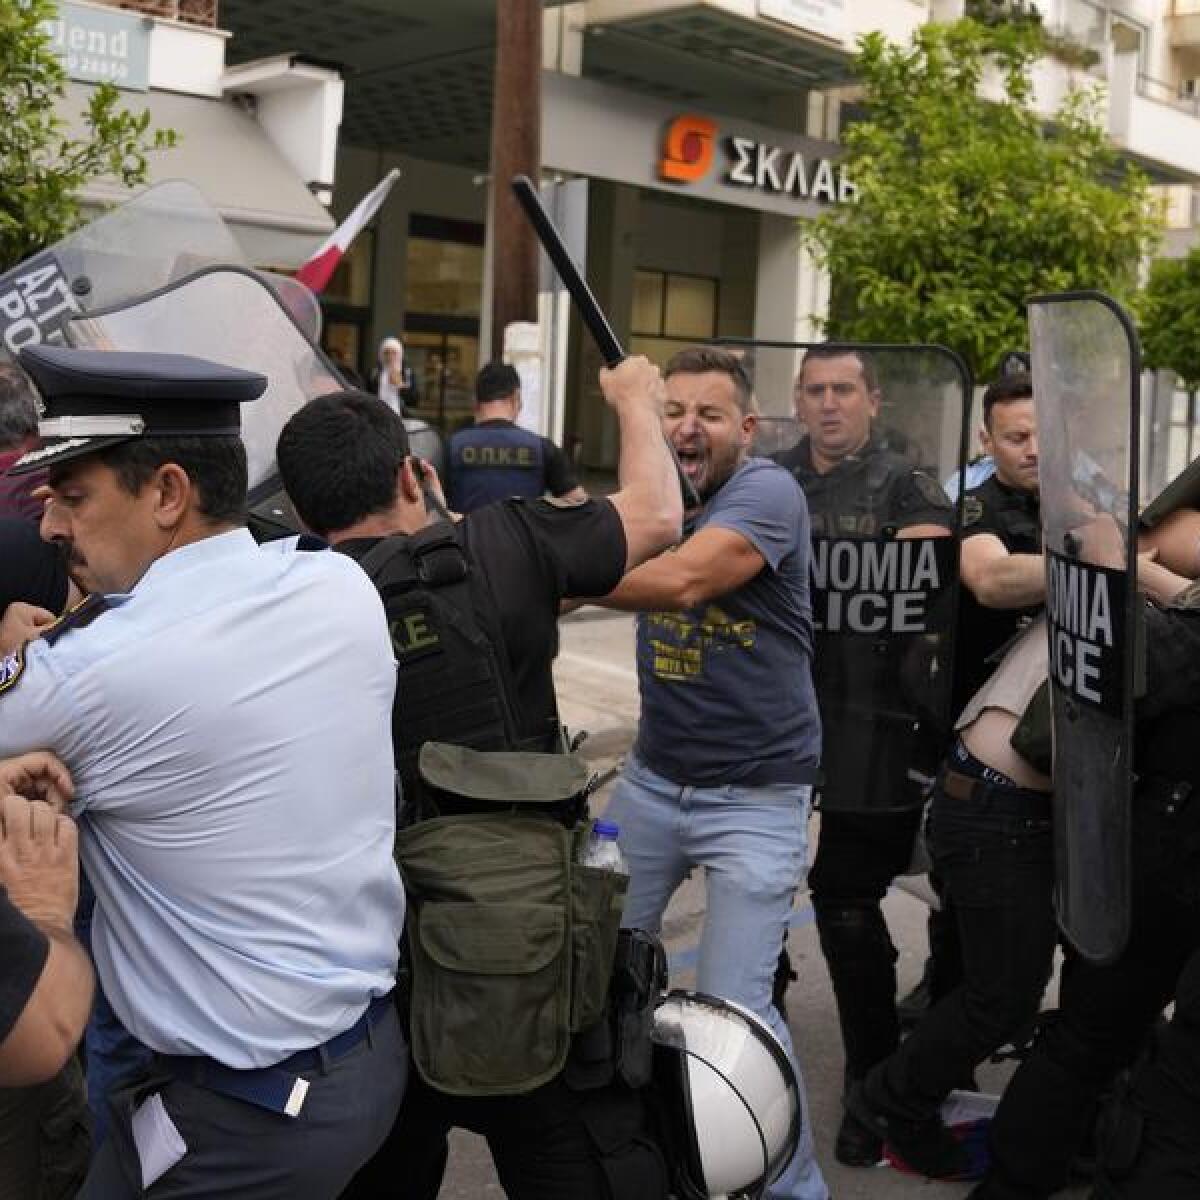 Police clash with protesters outside a court house in Kalamata